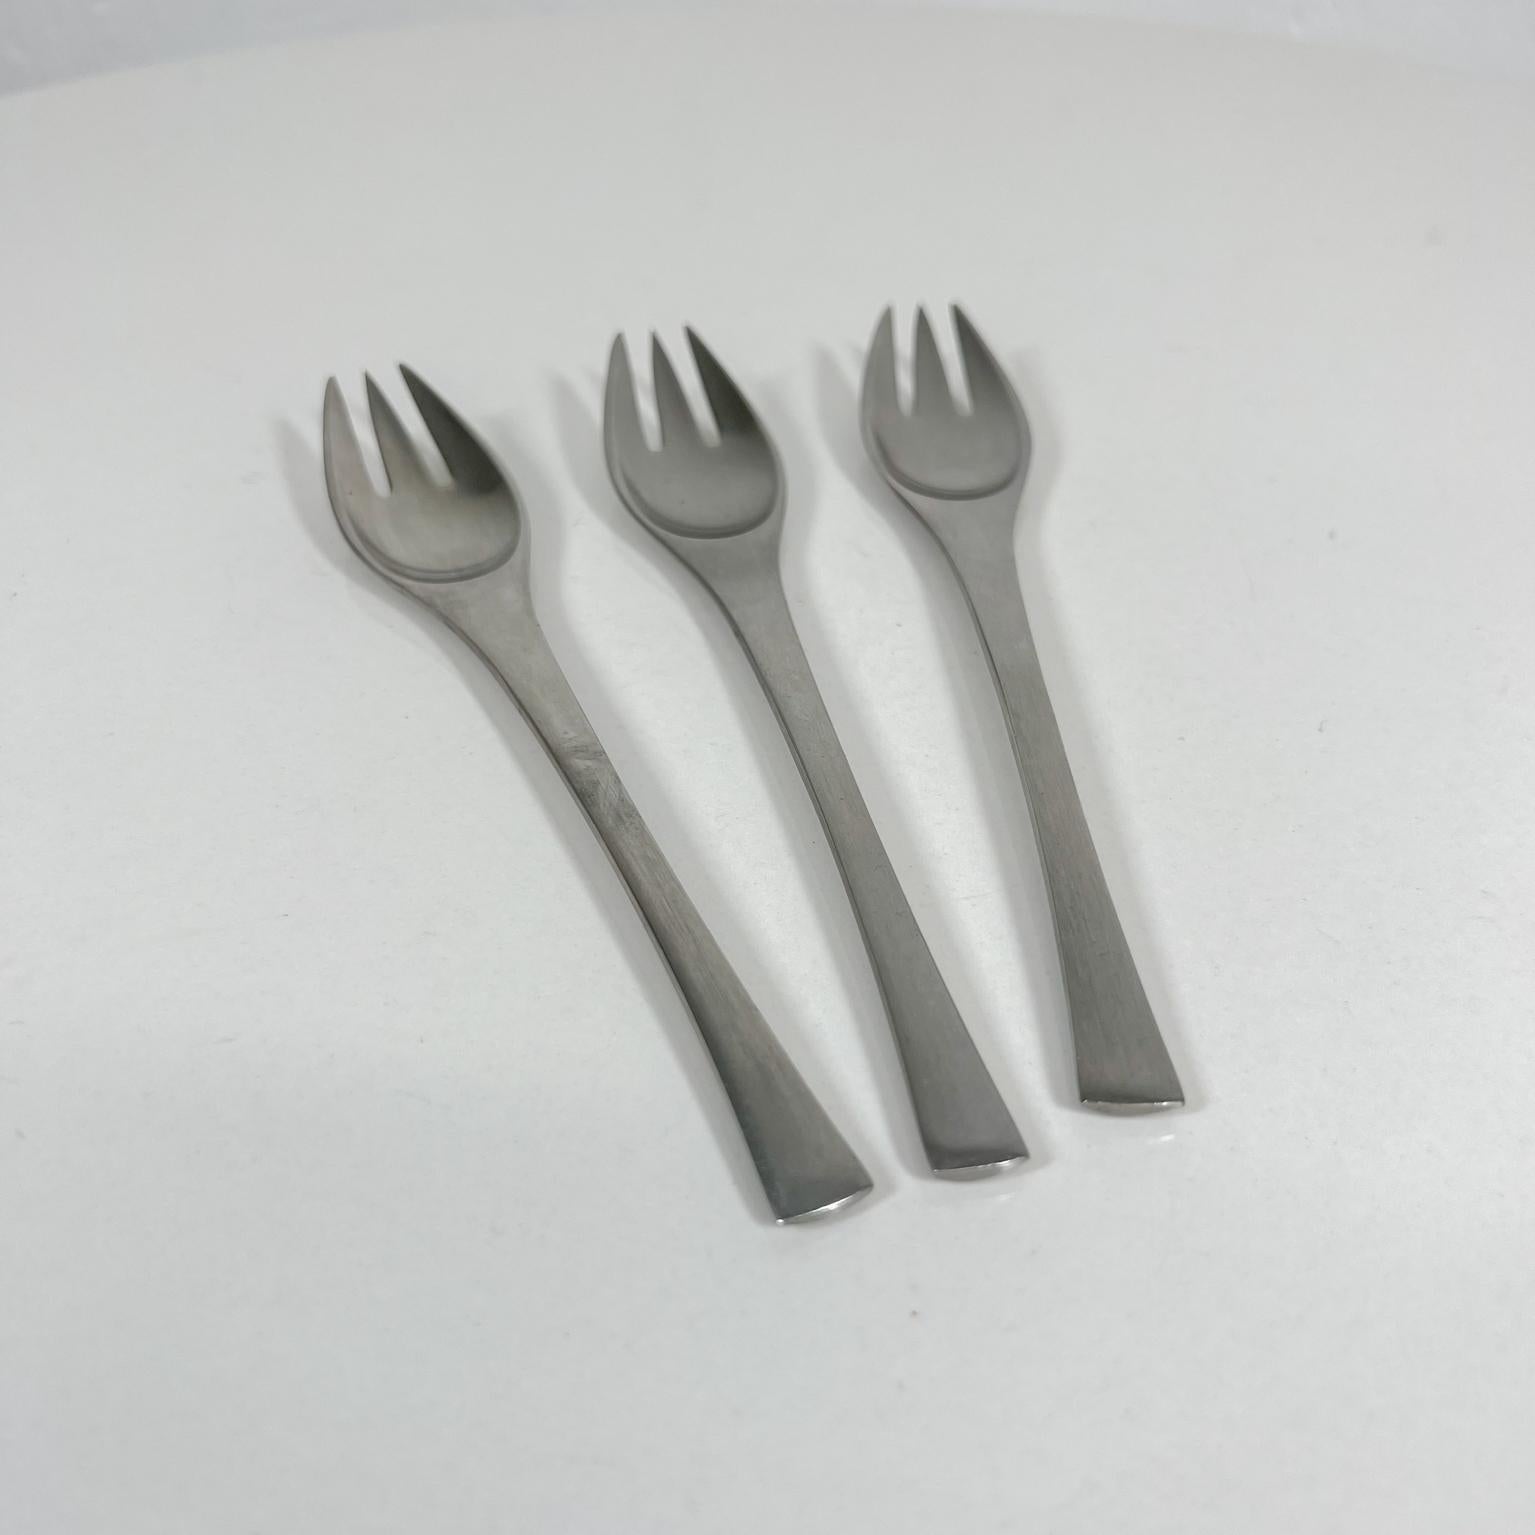 1950s Vintage Danish Modern Dansk IHQ Set of 3 small Forks Odin Germany
Designed by Jens Quistgaard Maker stamped
Stainless Steel
6.88 x 1.13
Preowned with wear and use present
Original unrestored vintage condition.
See all images provided.